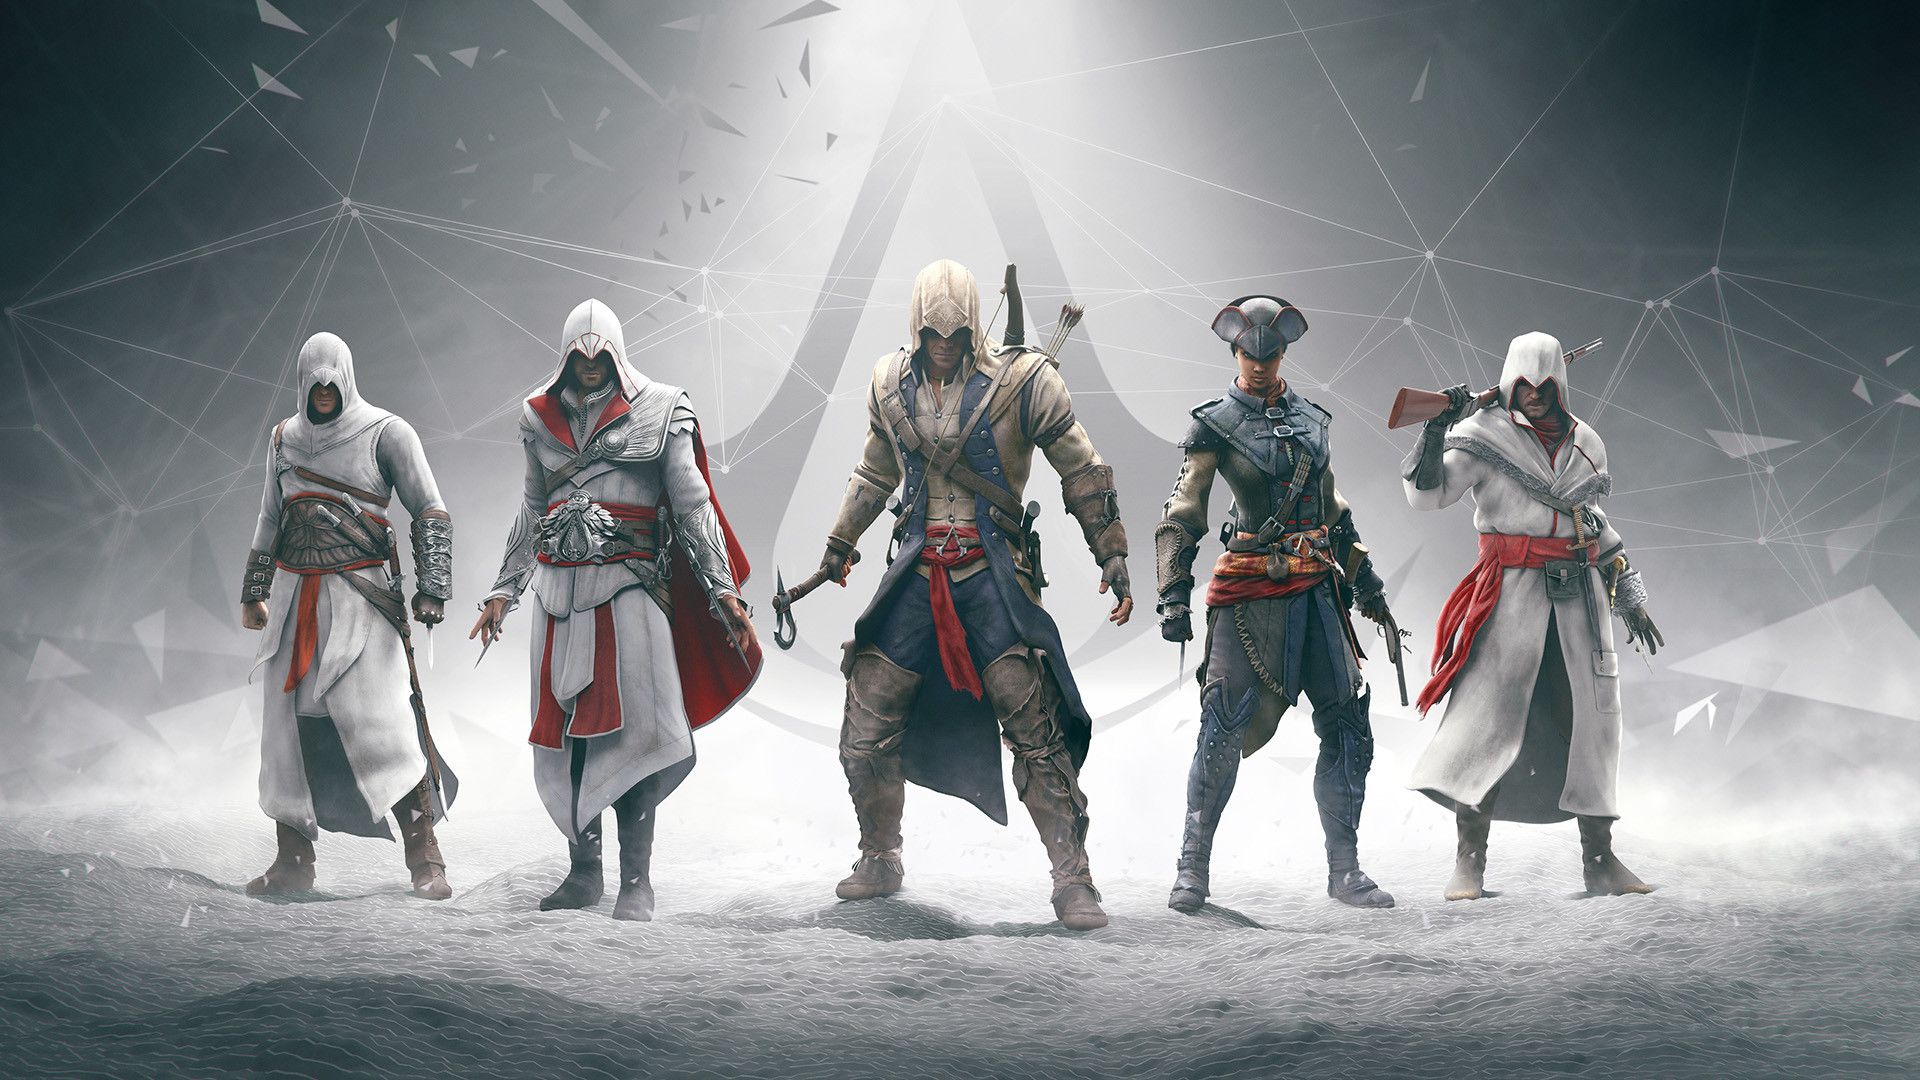 This is one of the coolest wallpapers I've seen. : assassinscreed